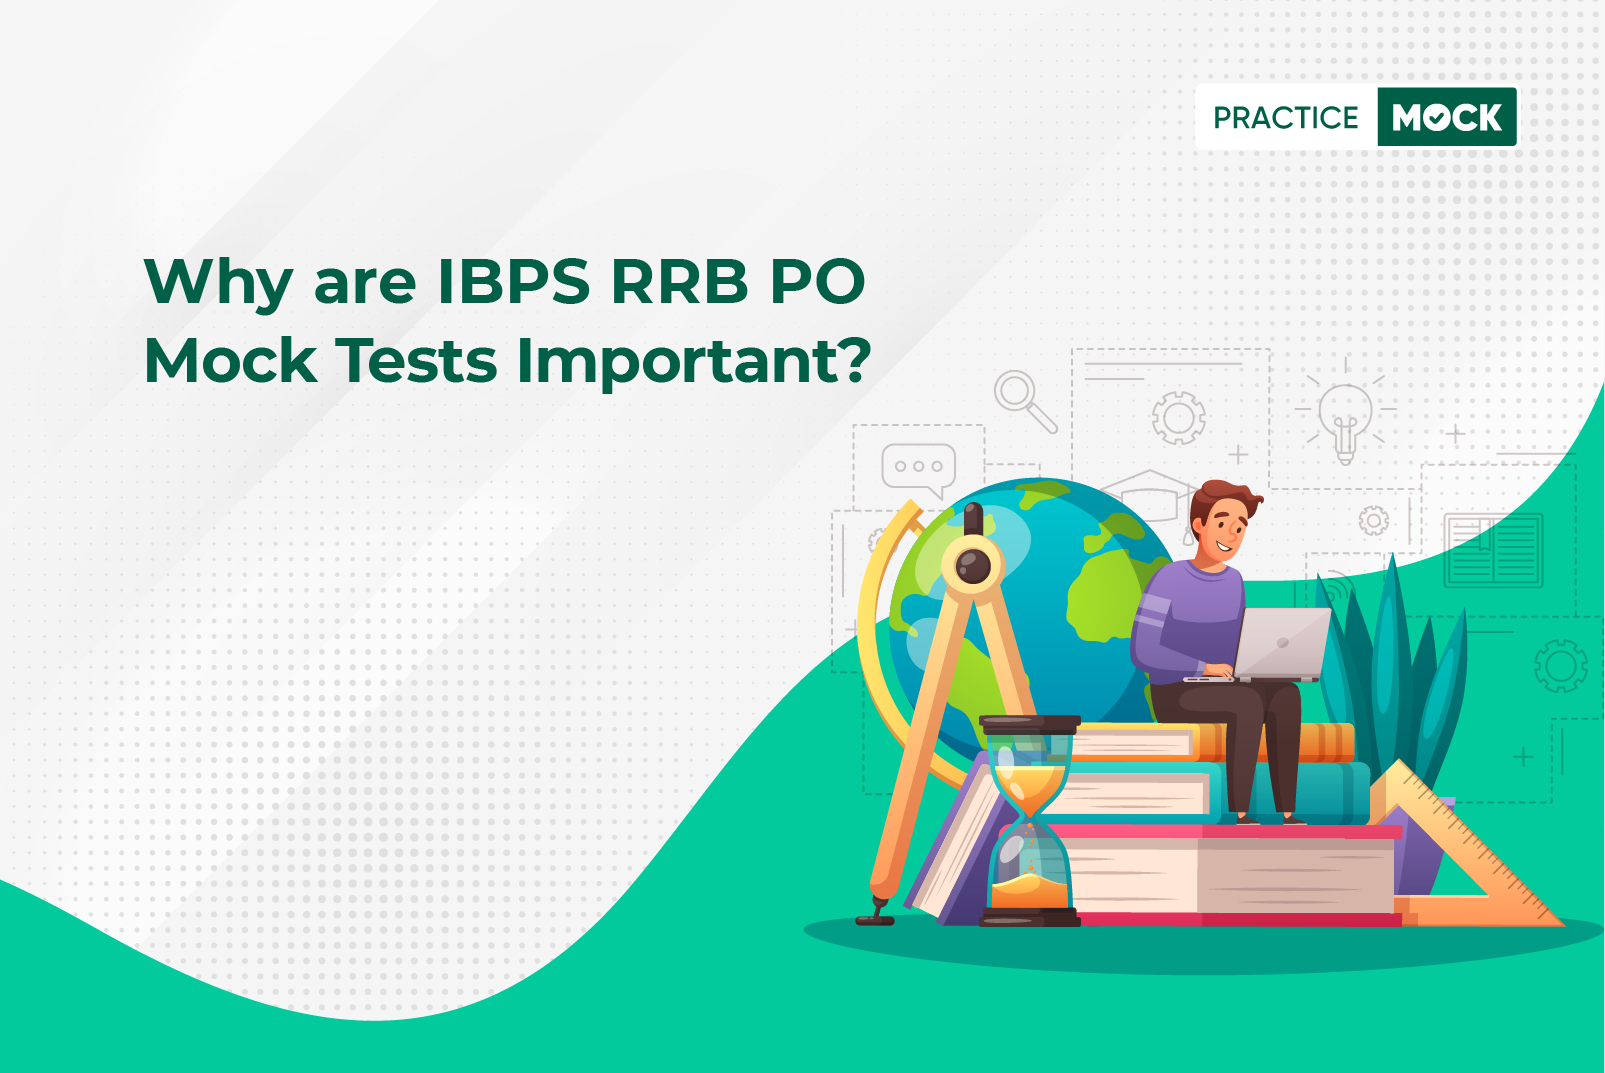 Why are IBPS RRB PO Mock Tests Important?